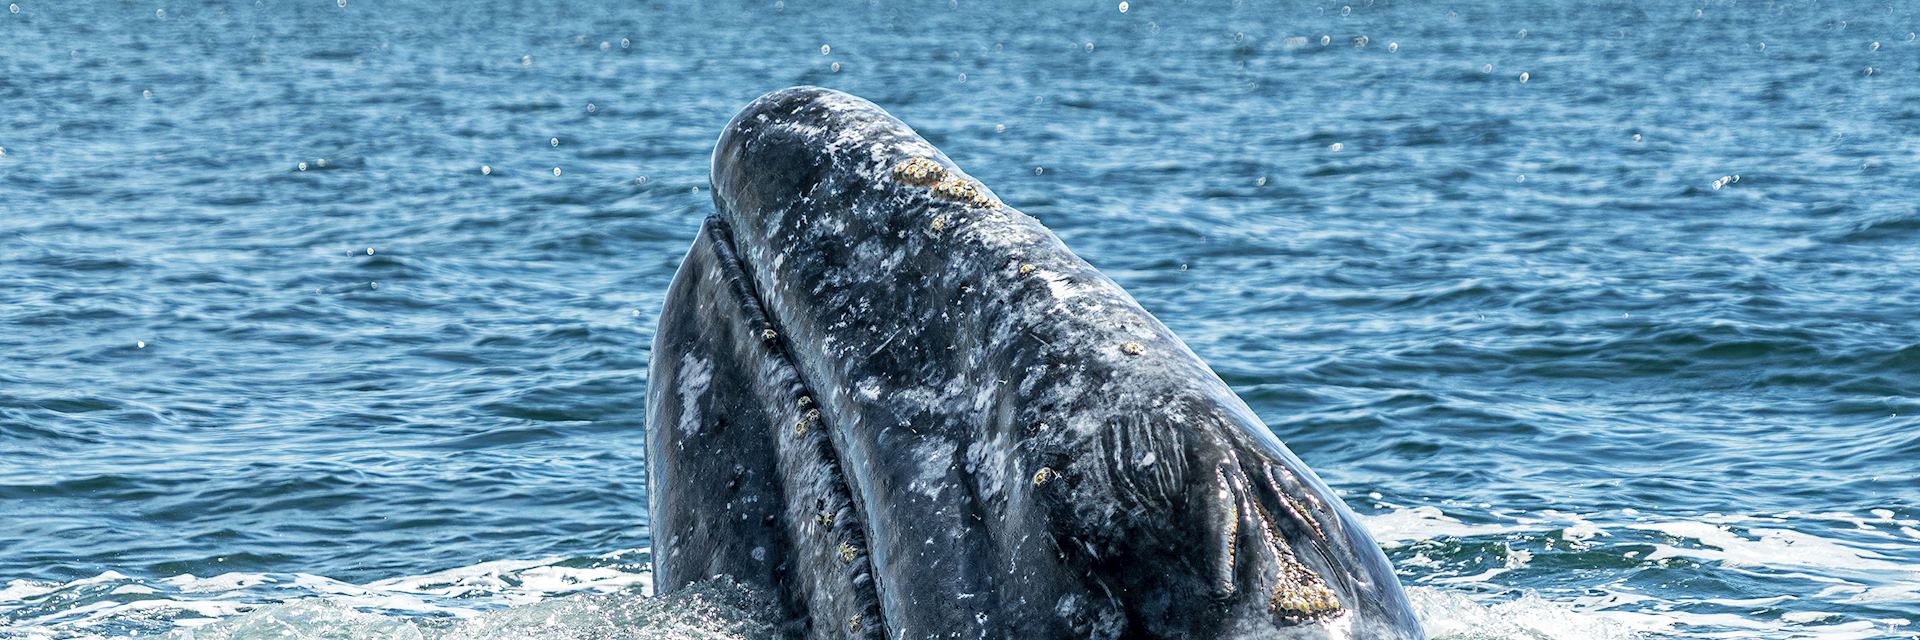 Grey whale in Magdalena Bay